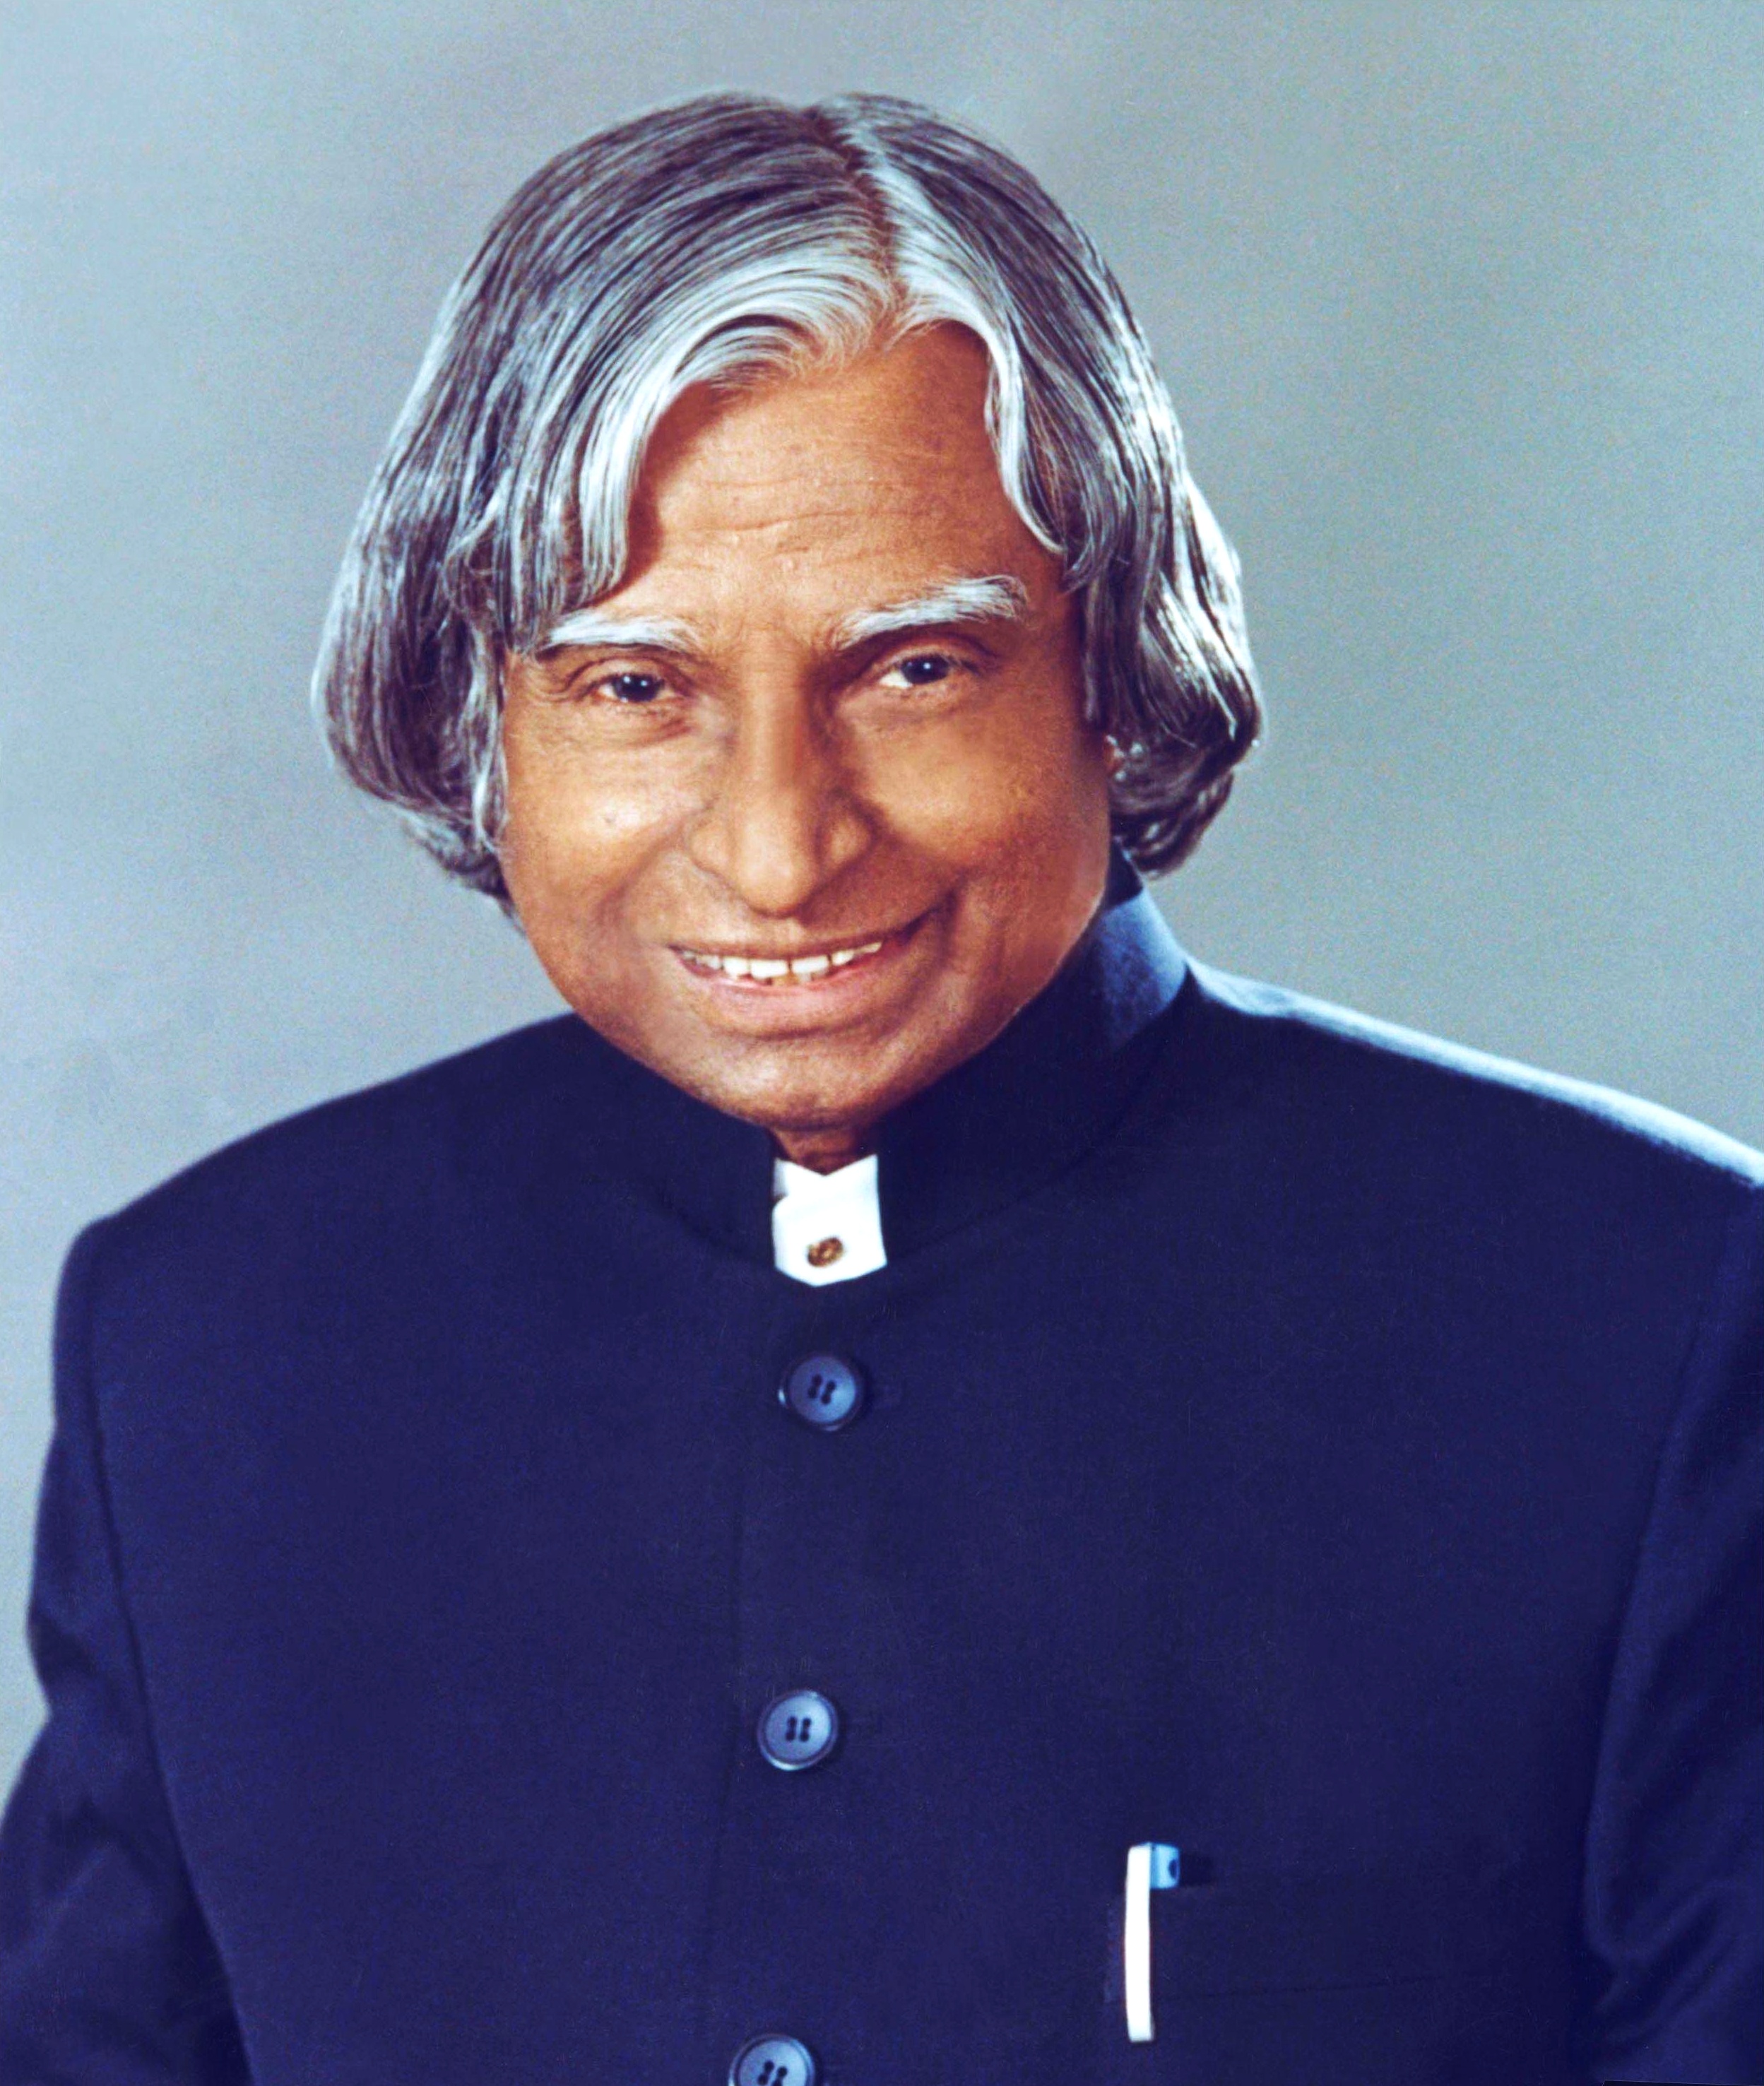 This is an image of A.J.P ABDUL KALAM